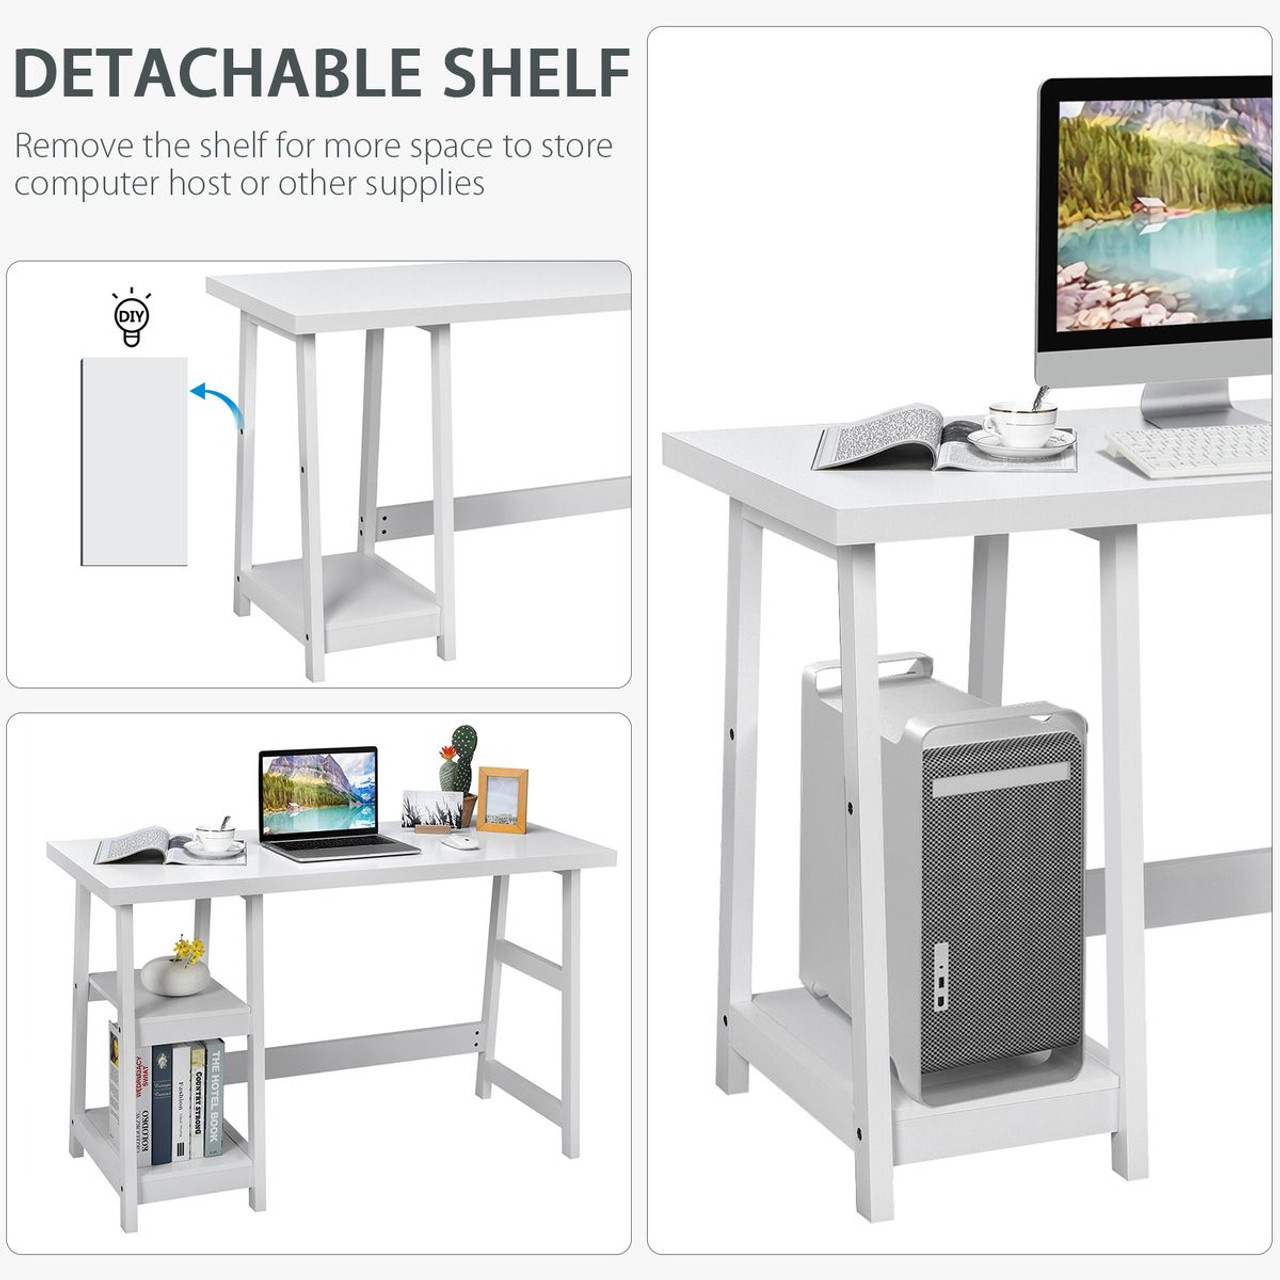 Costway Trestle Computer Desk with Removable Shelves product image